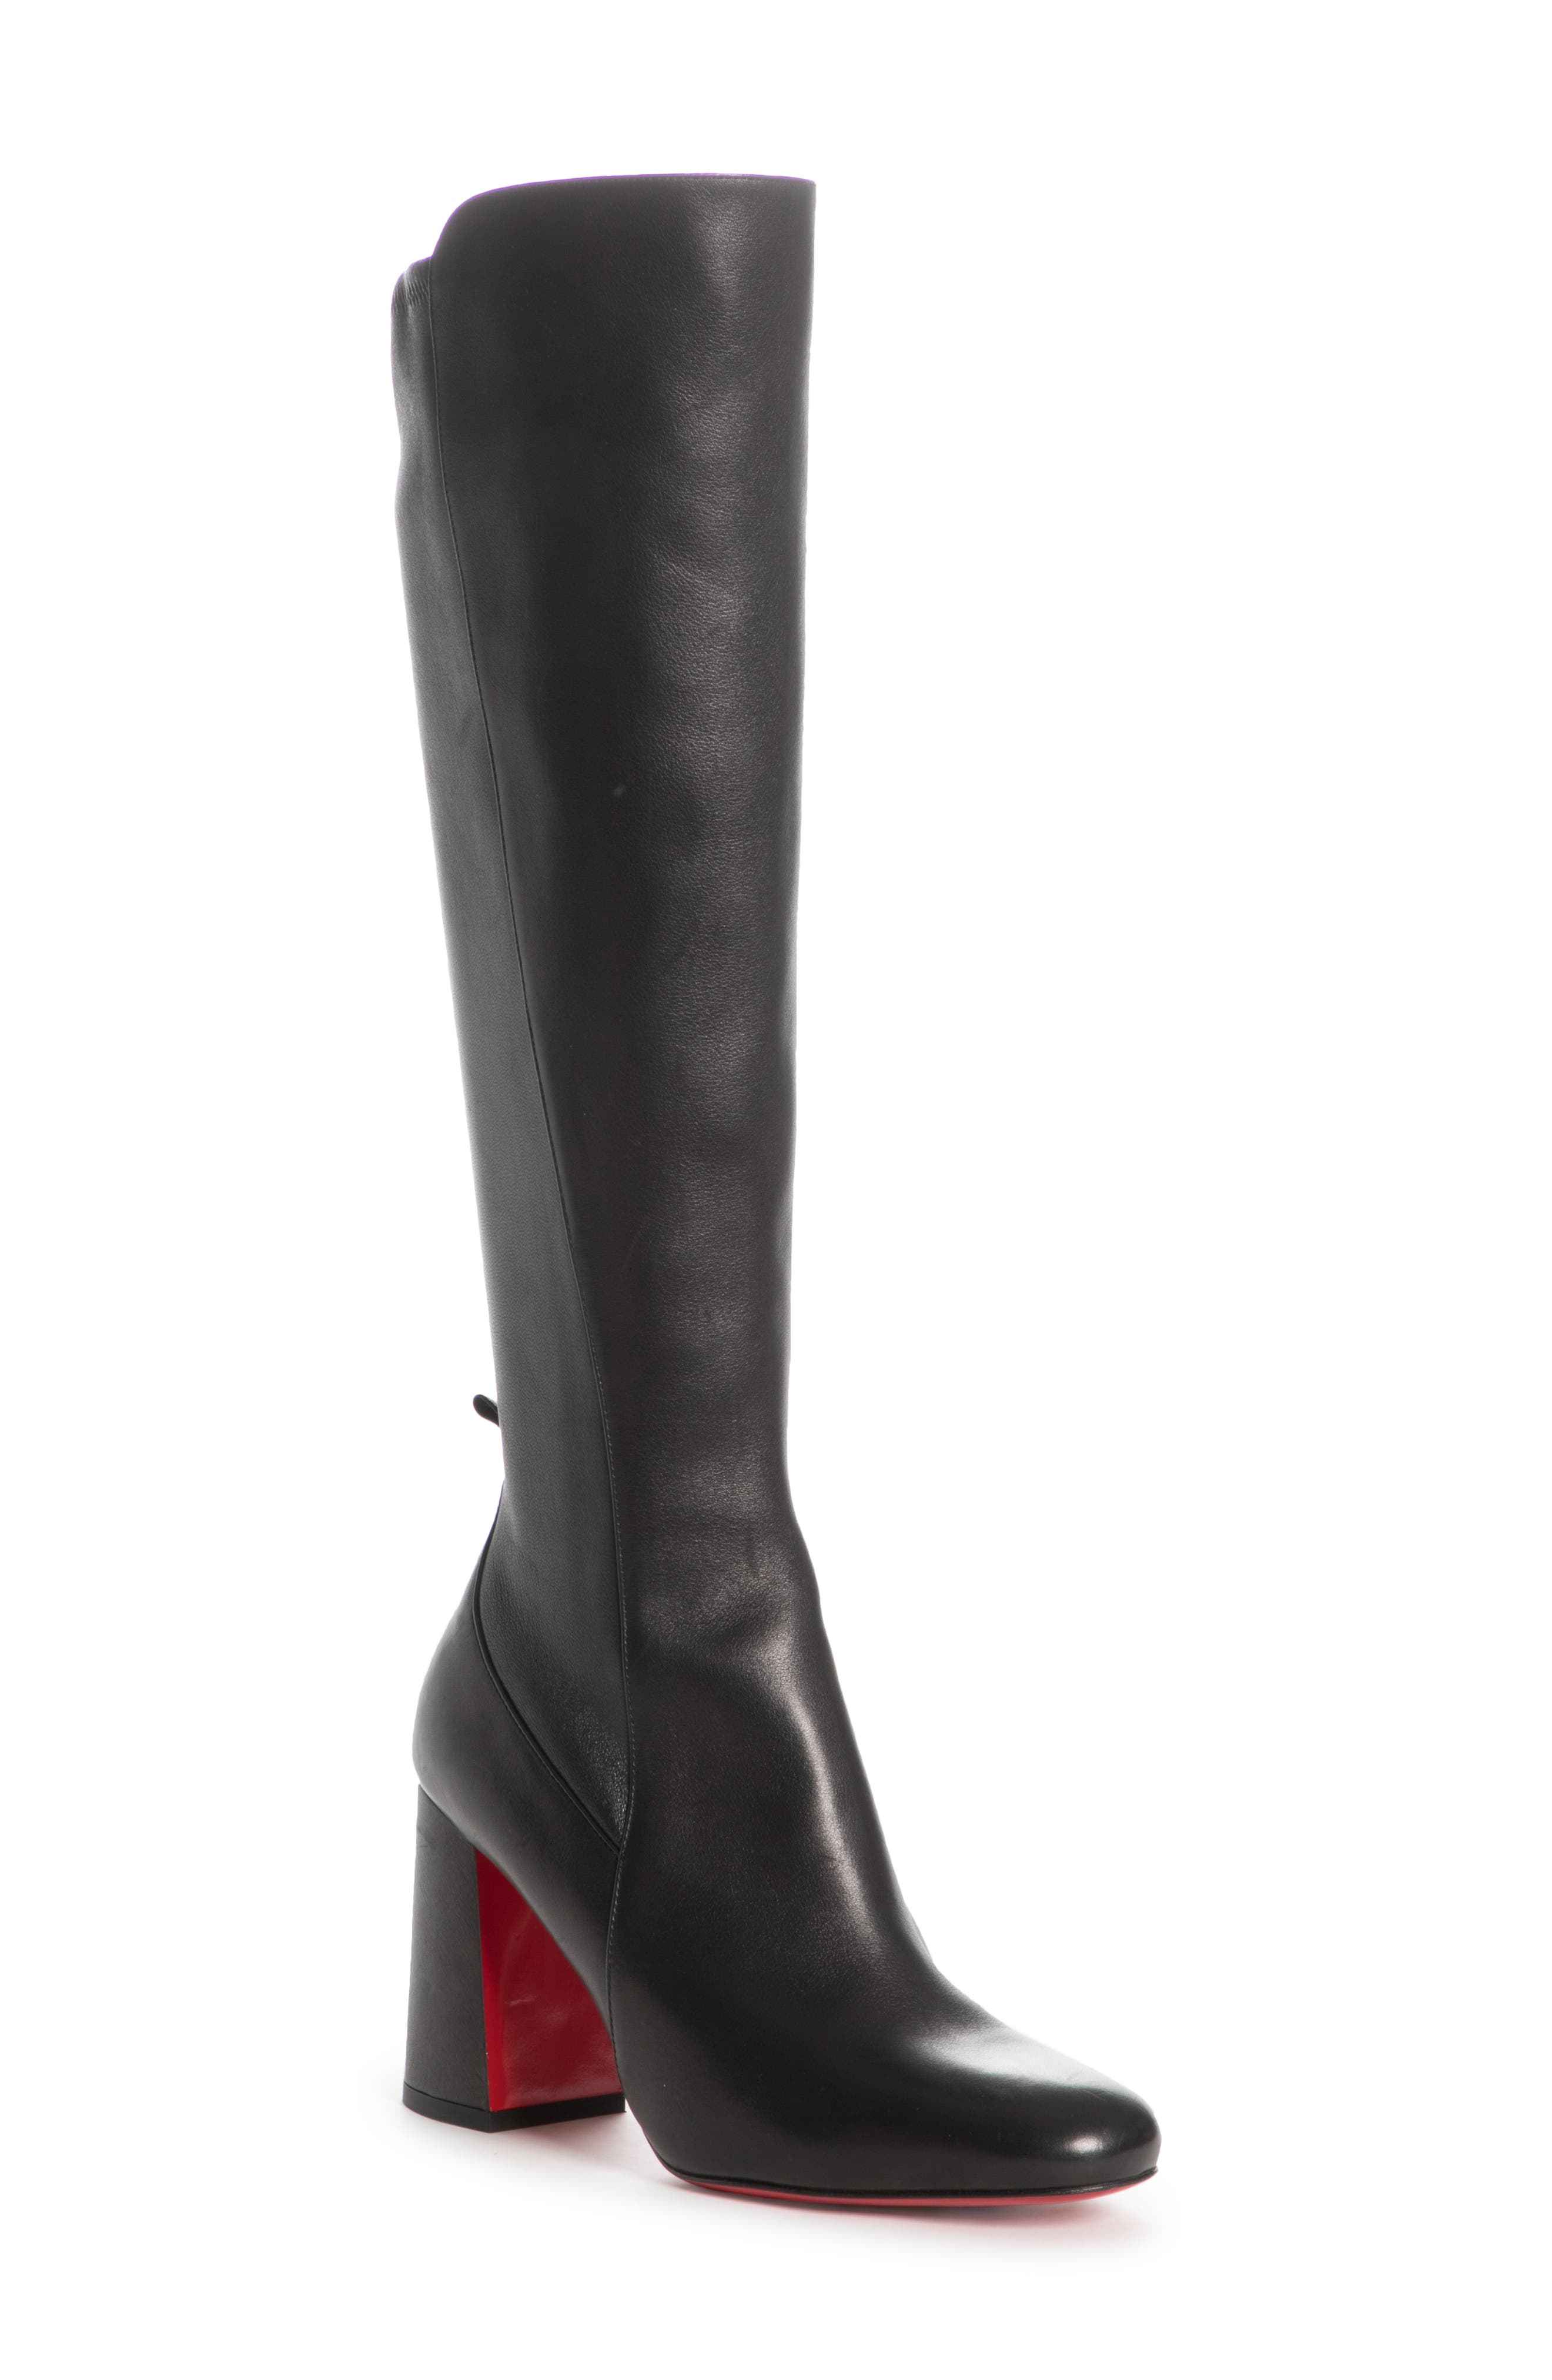 louboutin boots knee high